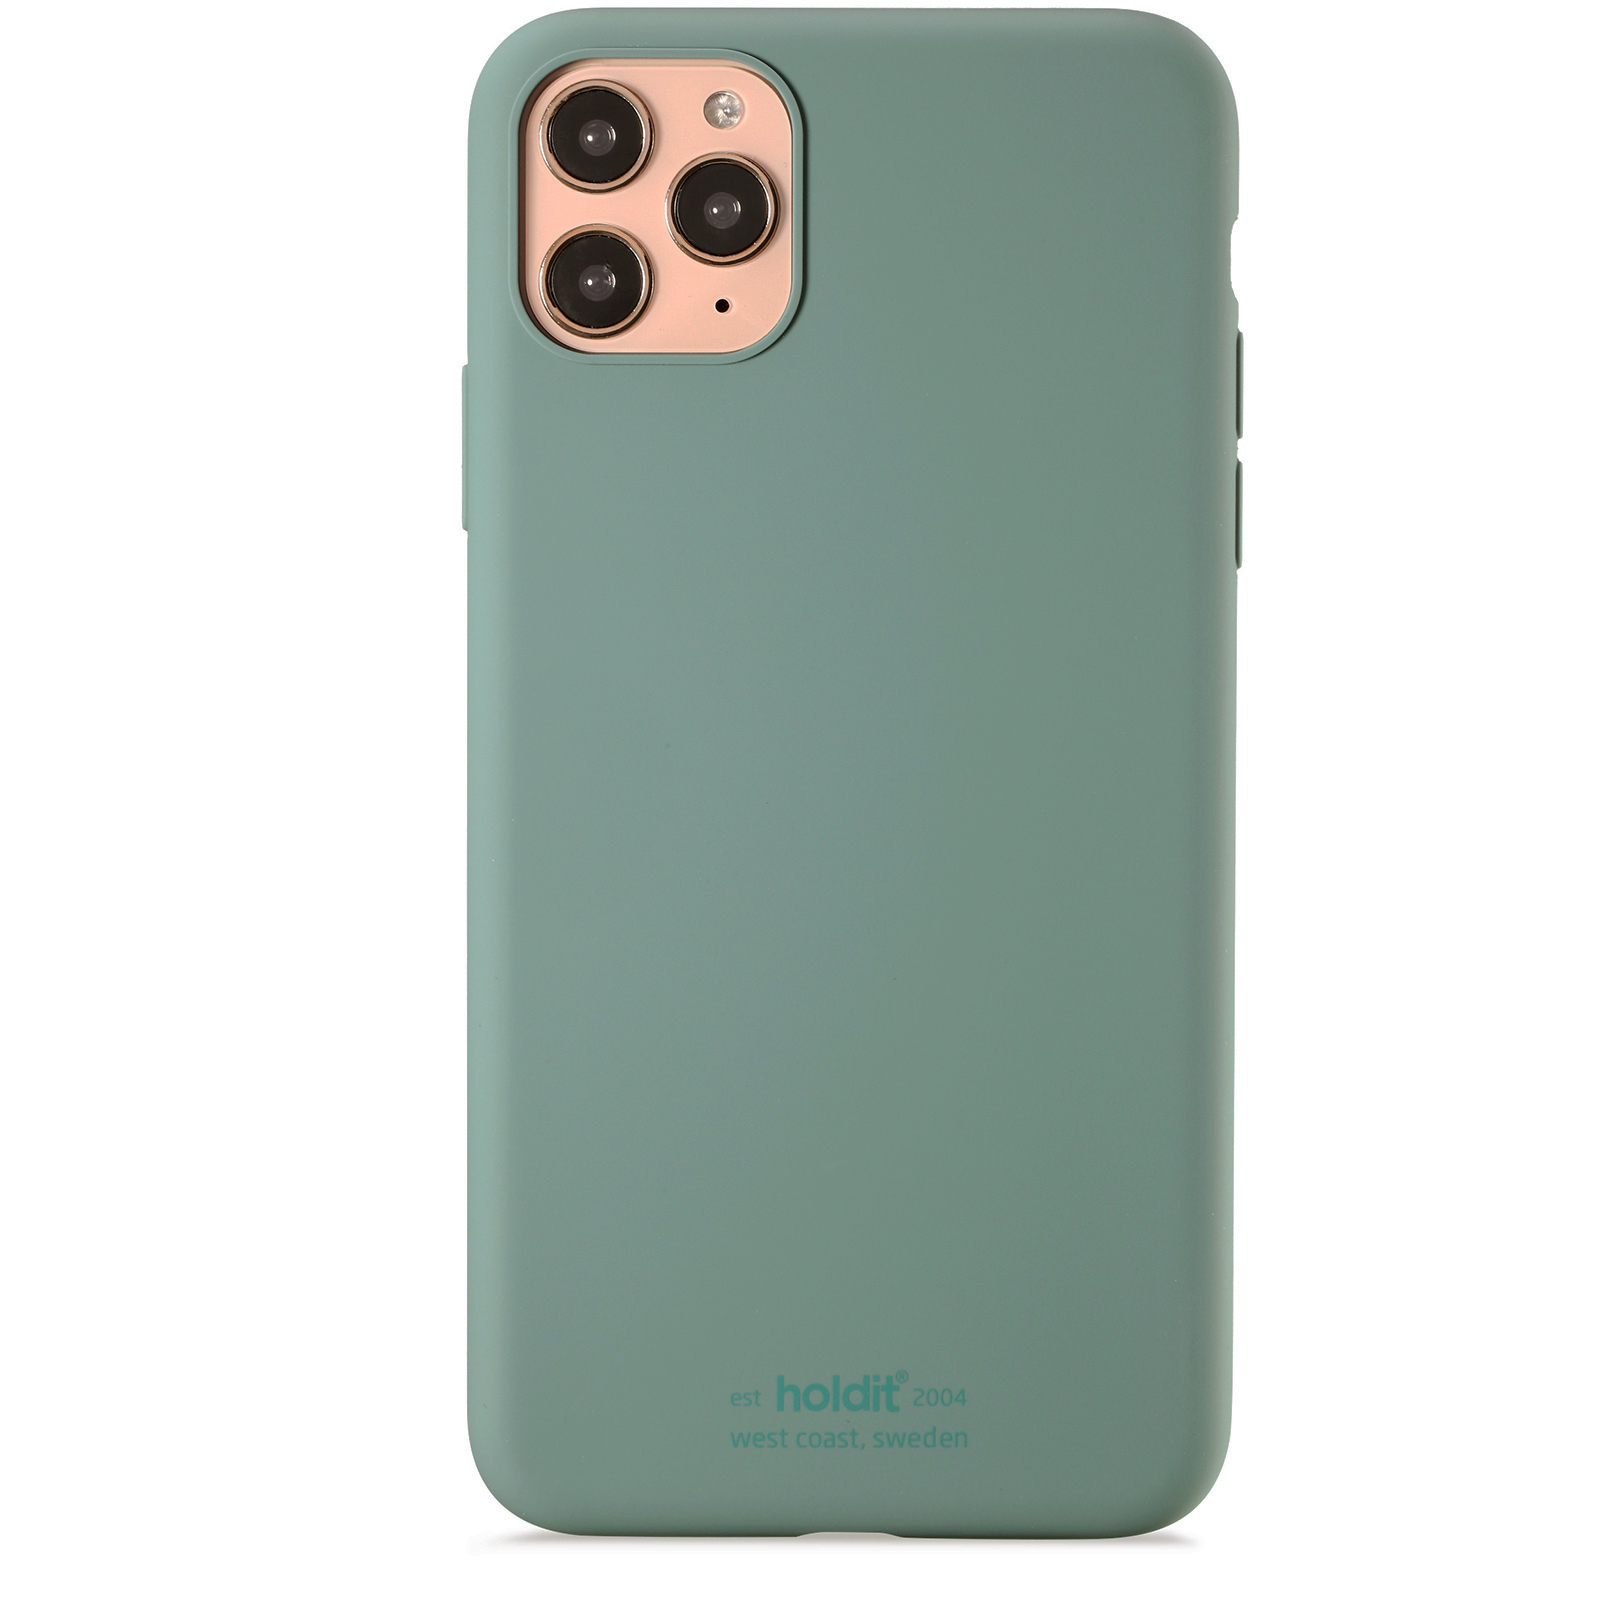 iPhone 11 Pro Max, case silicone, moss green